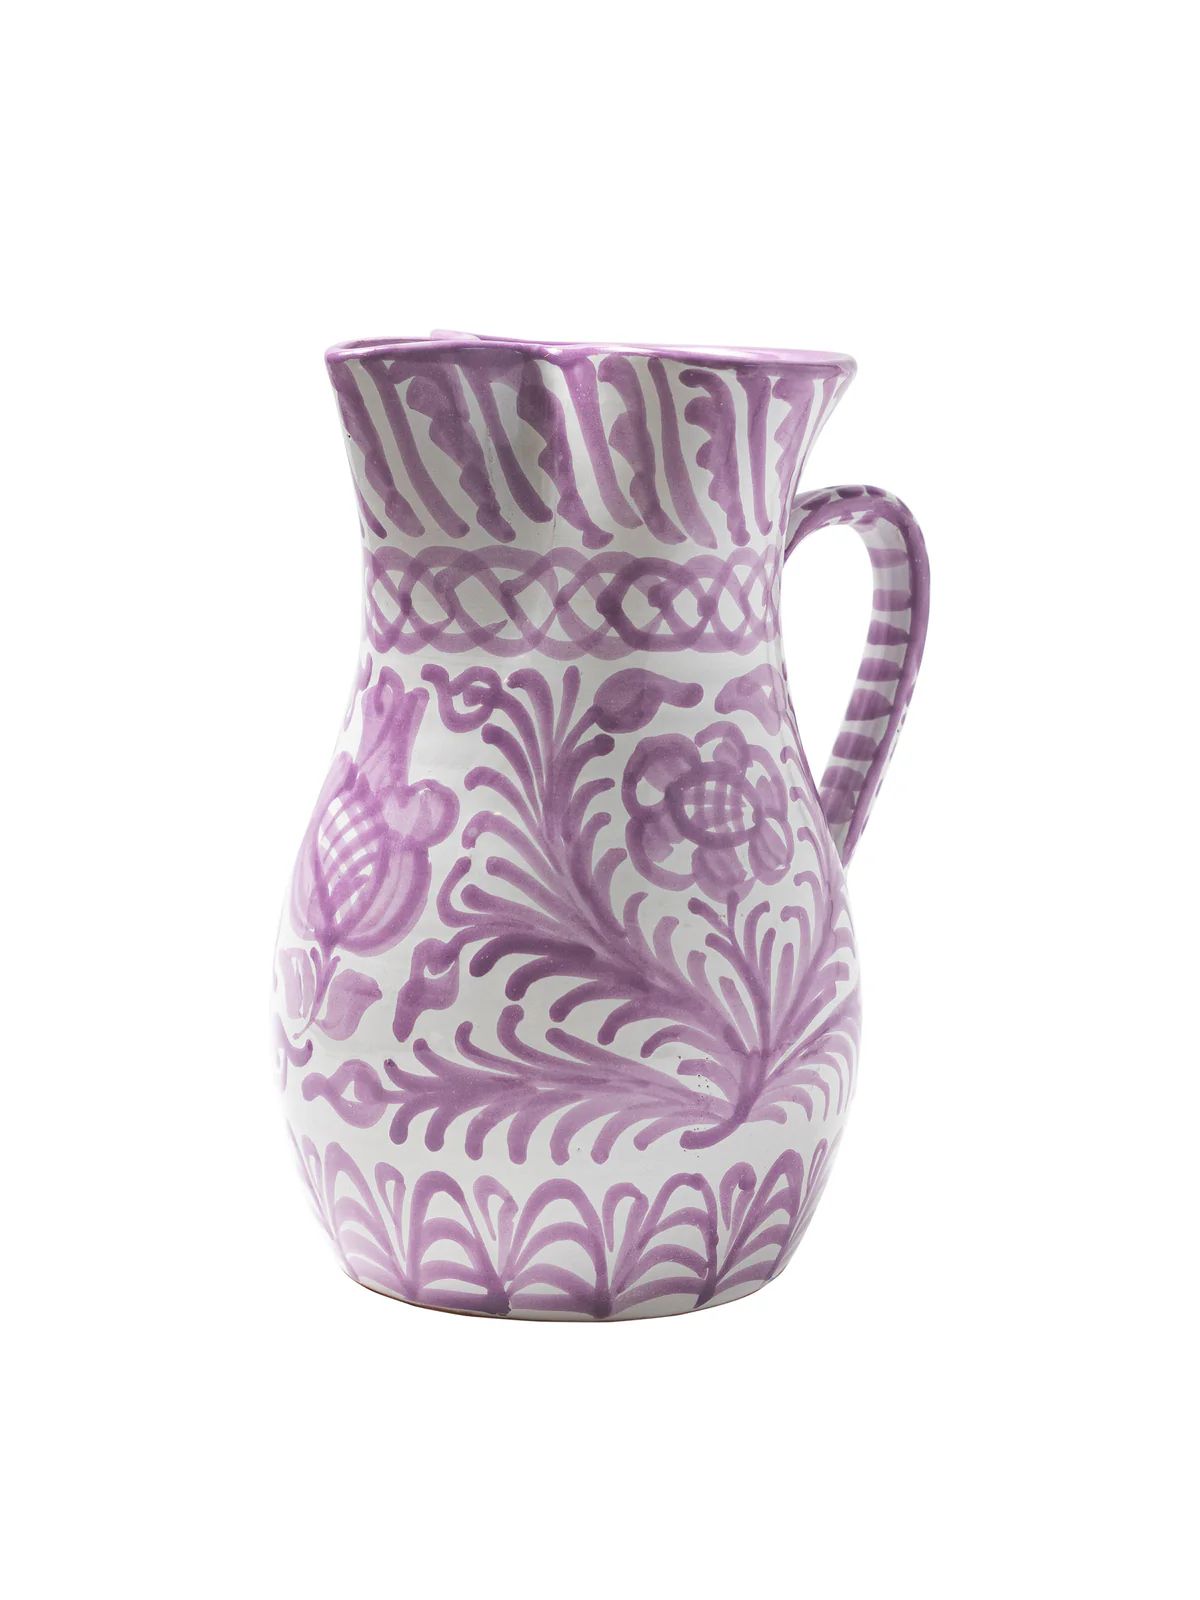 Casa Lila Large Pitcher with Hand-painted Designs | Over The Moon